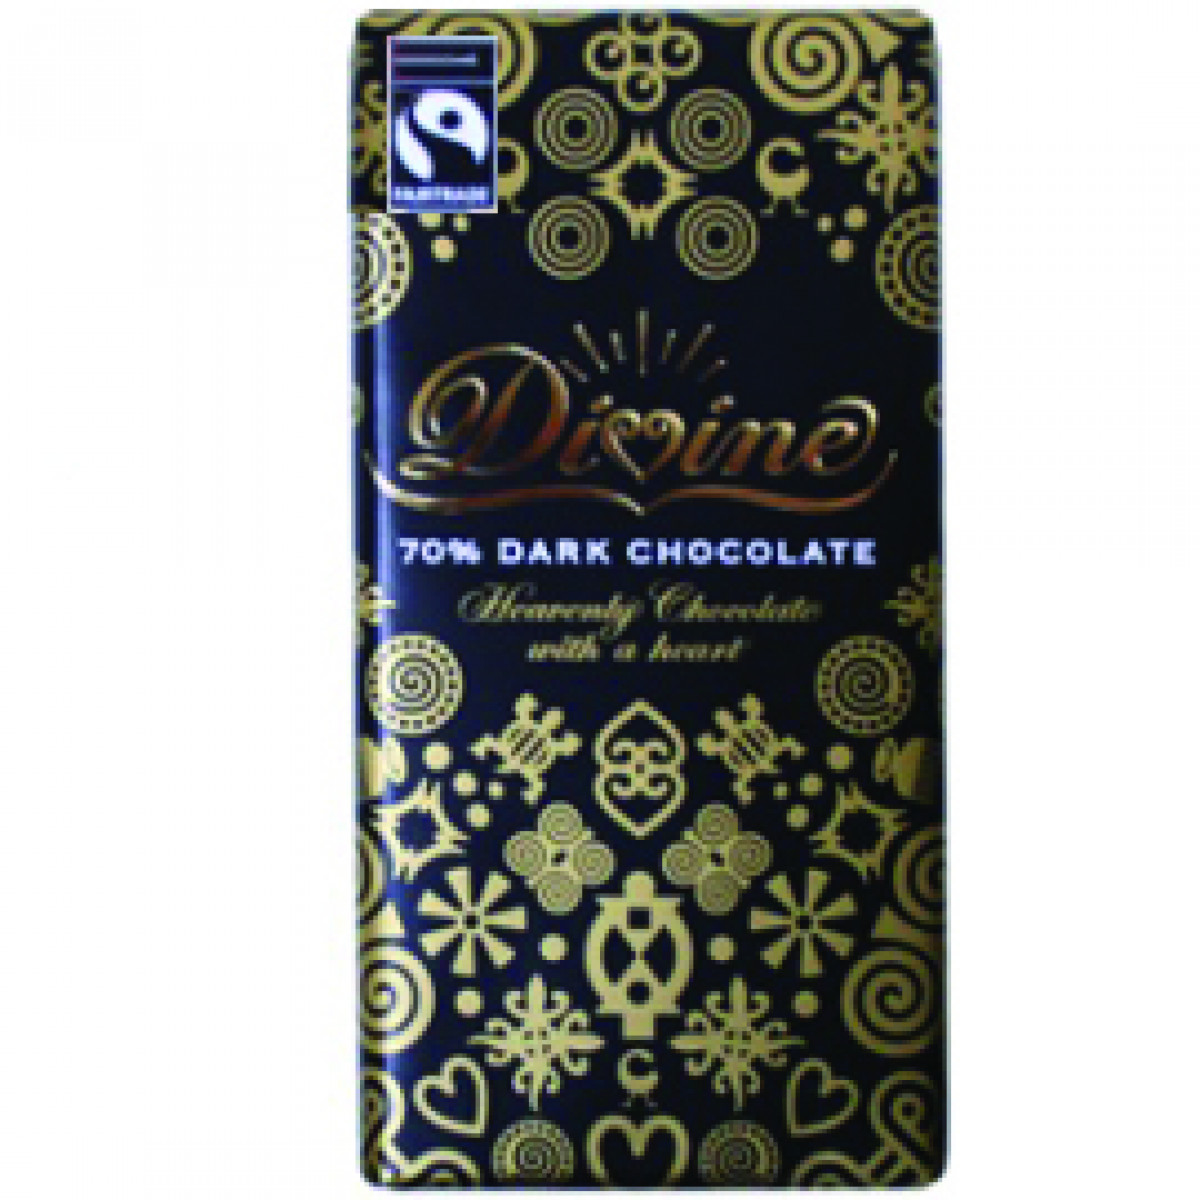 Product picture for Dark Chocolate 70%